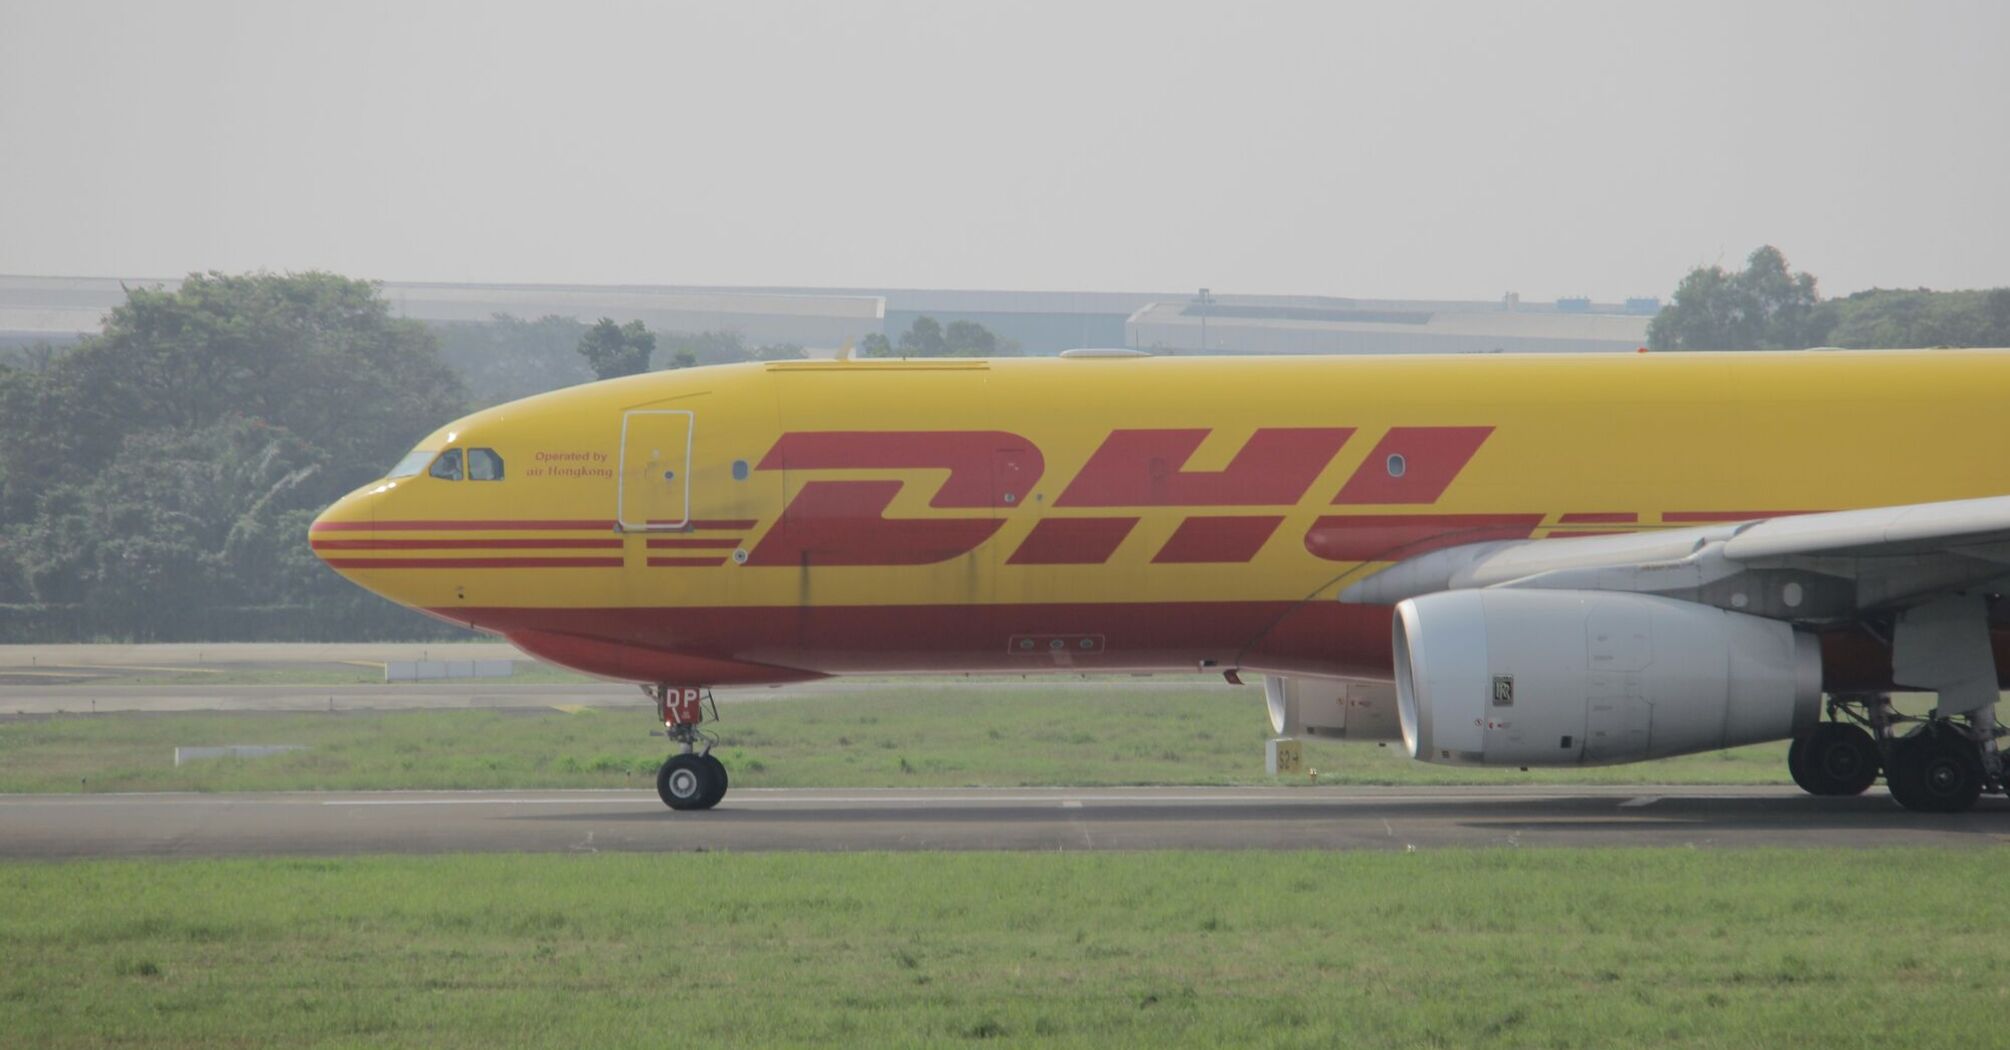 yellow and red DHL plane on airport during daytime